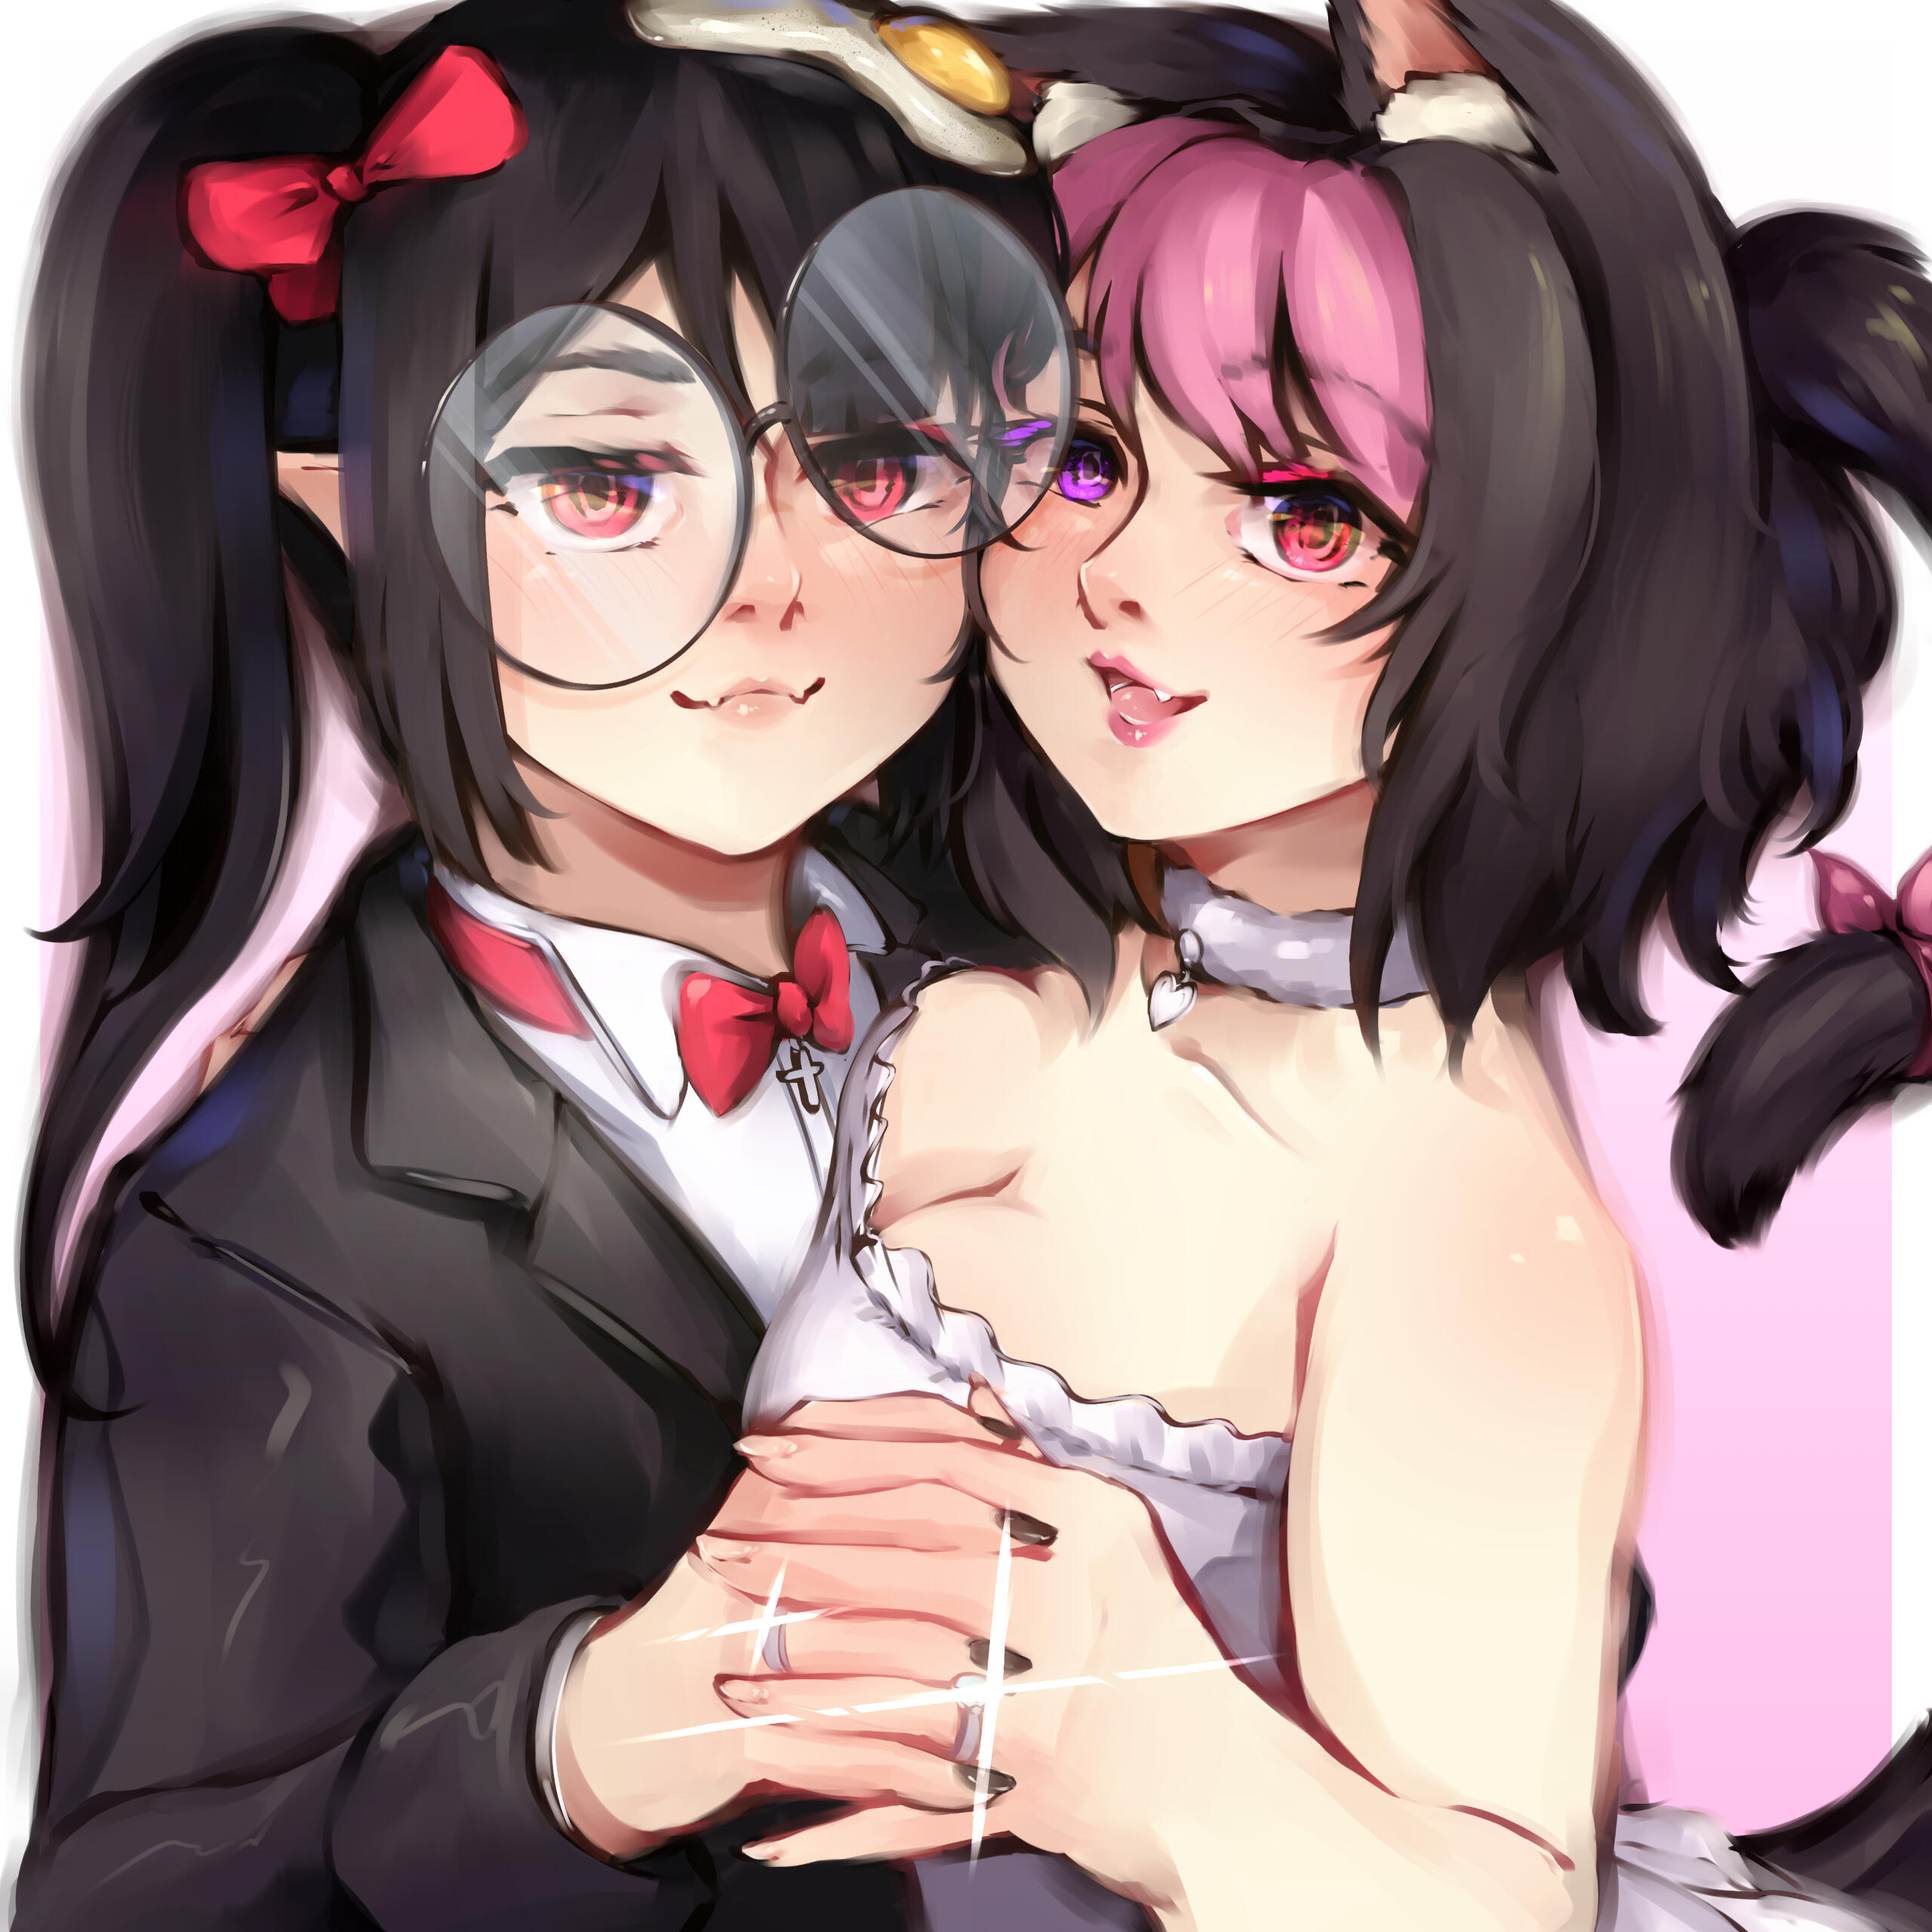 Digital fanart of RevSaysDesu & Darlingstrawbie, in their wedding clothes and hugging each other with their fingers interlocked. Both looking at the viewer; Darlingstawbie with a open smile and Rev with a smug smile.